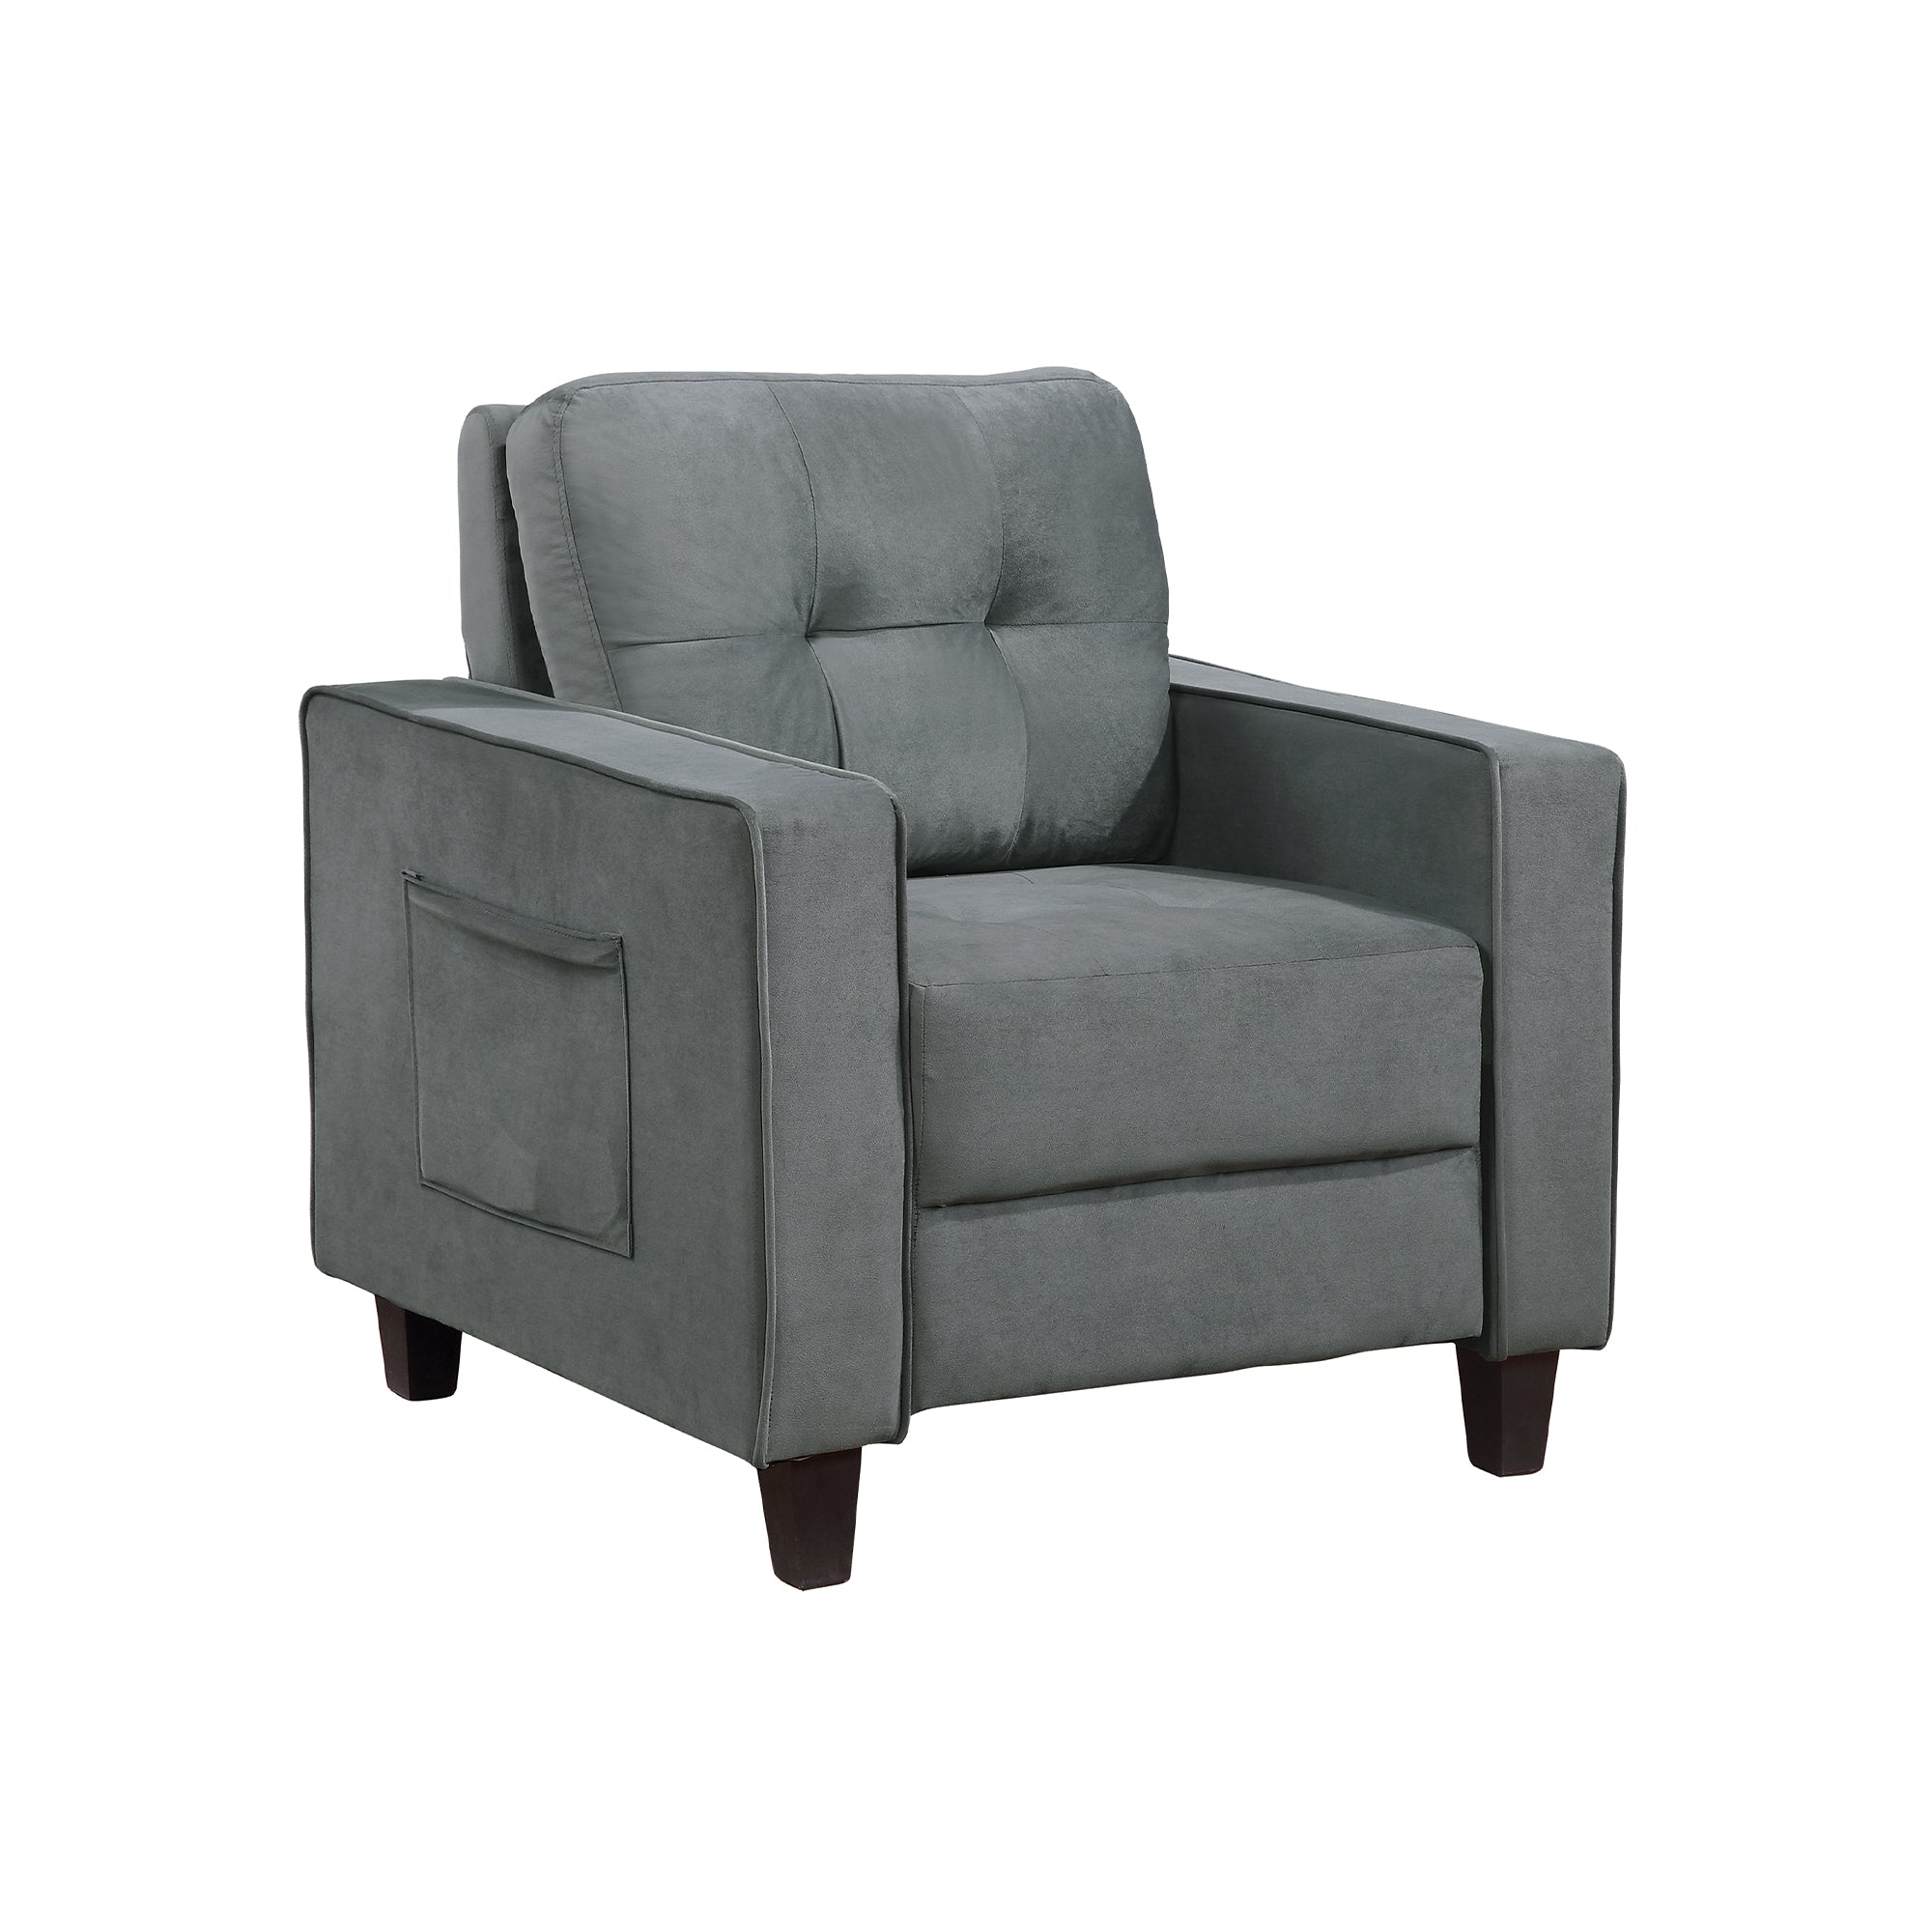 Comfortable Armchair Modern Sofa Couch for Home Living Room-Boyel Living